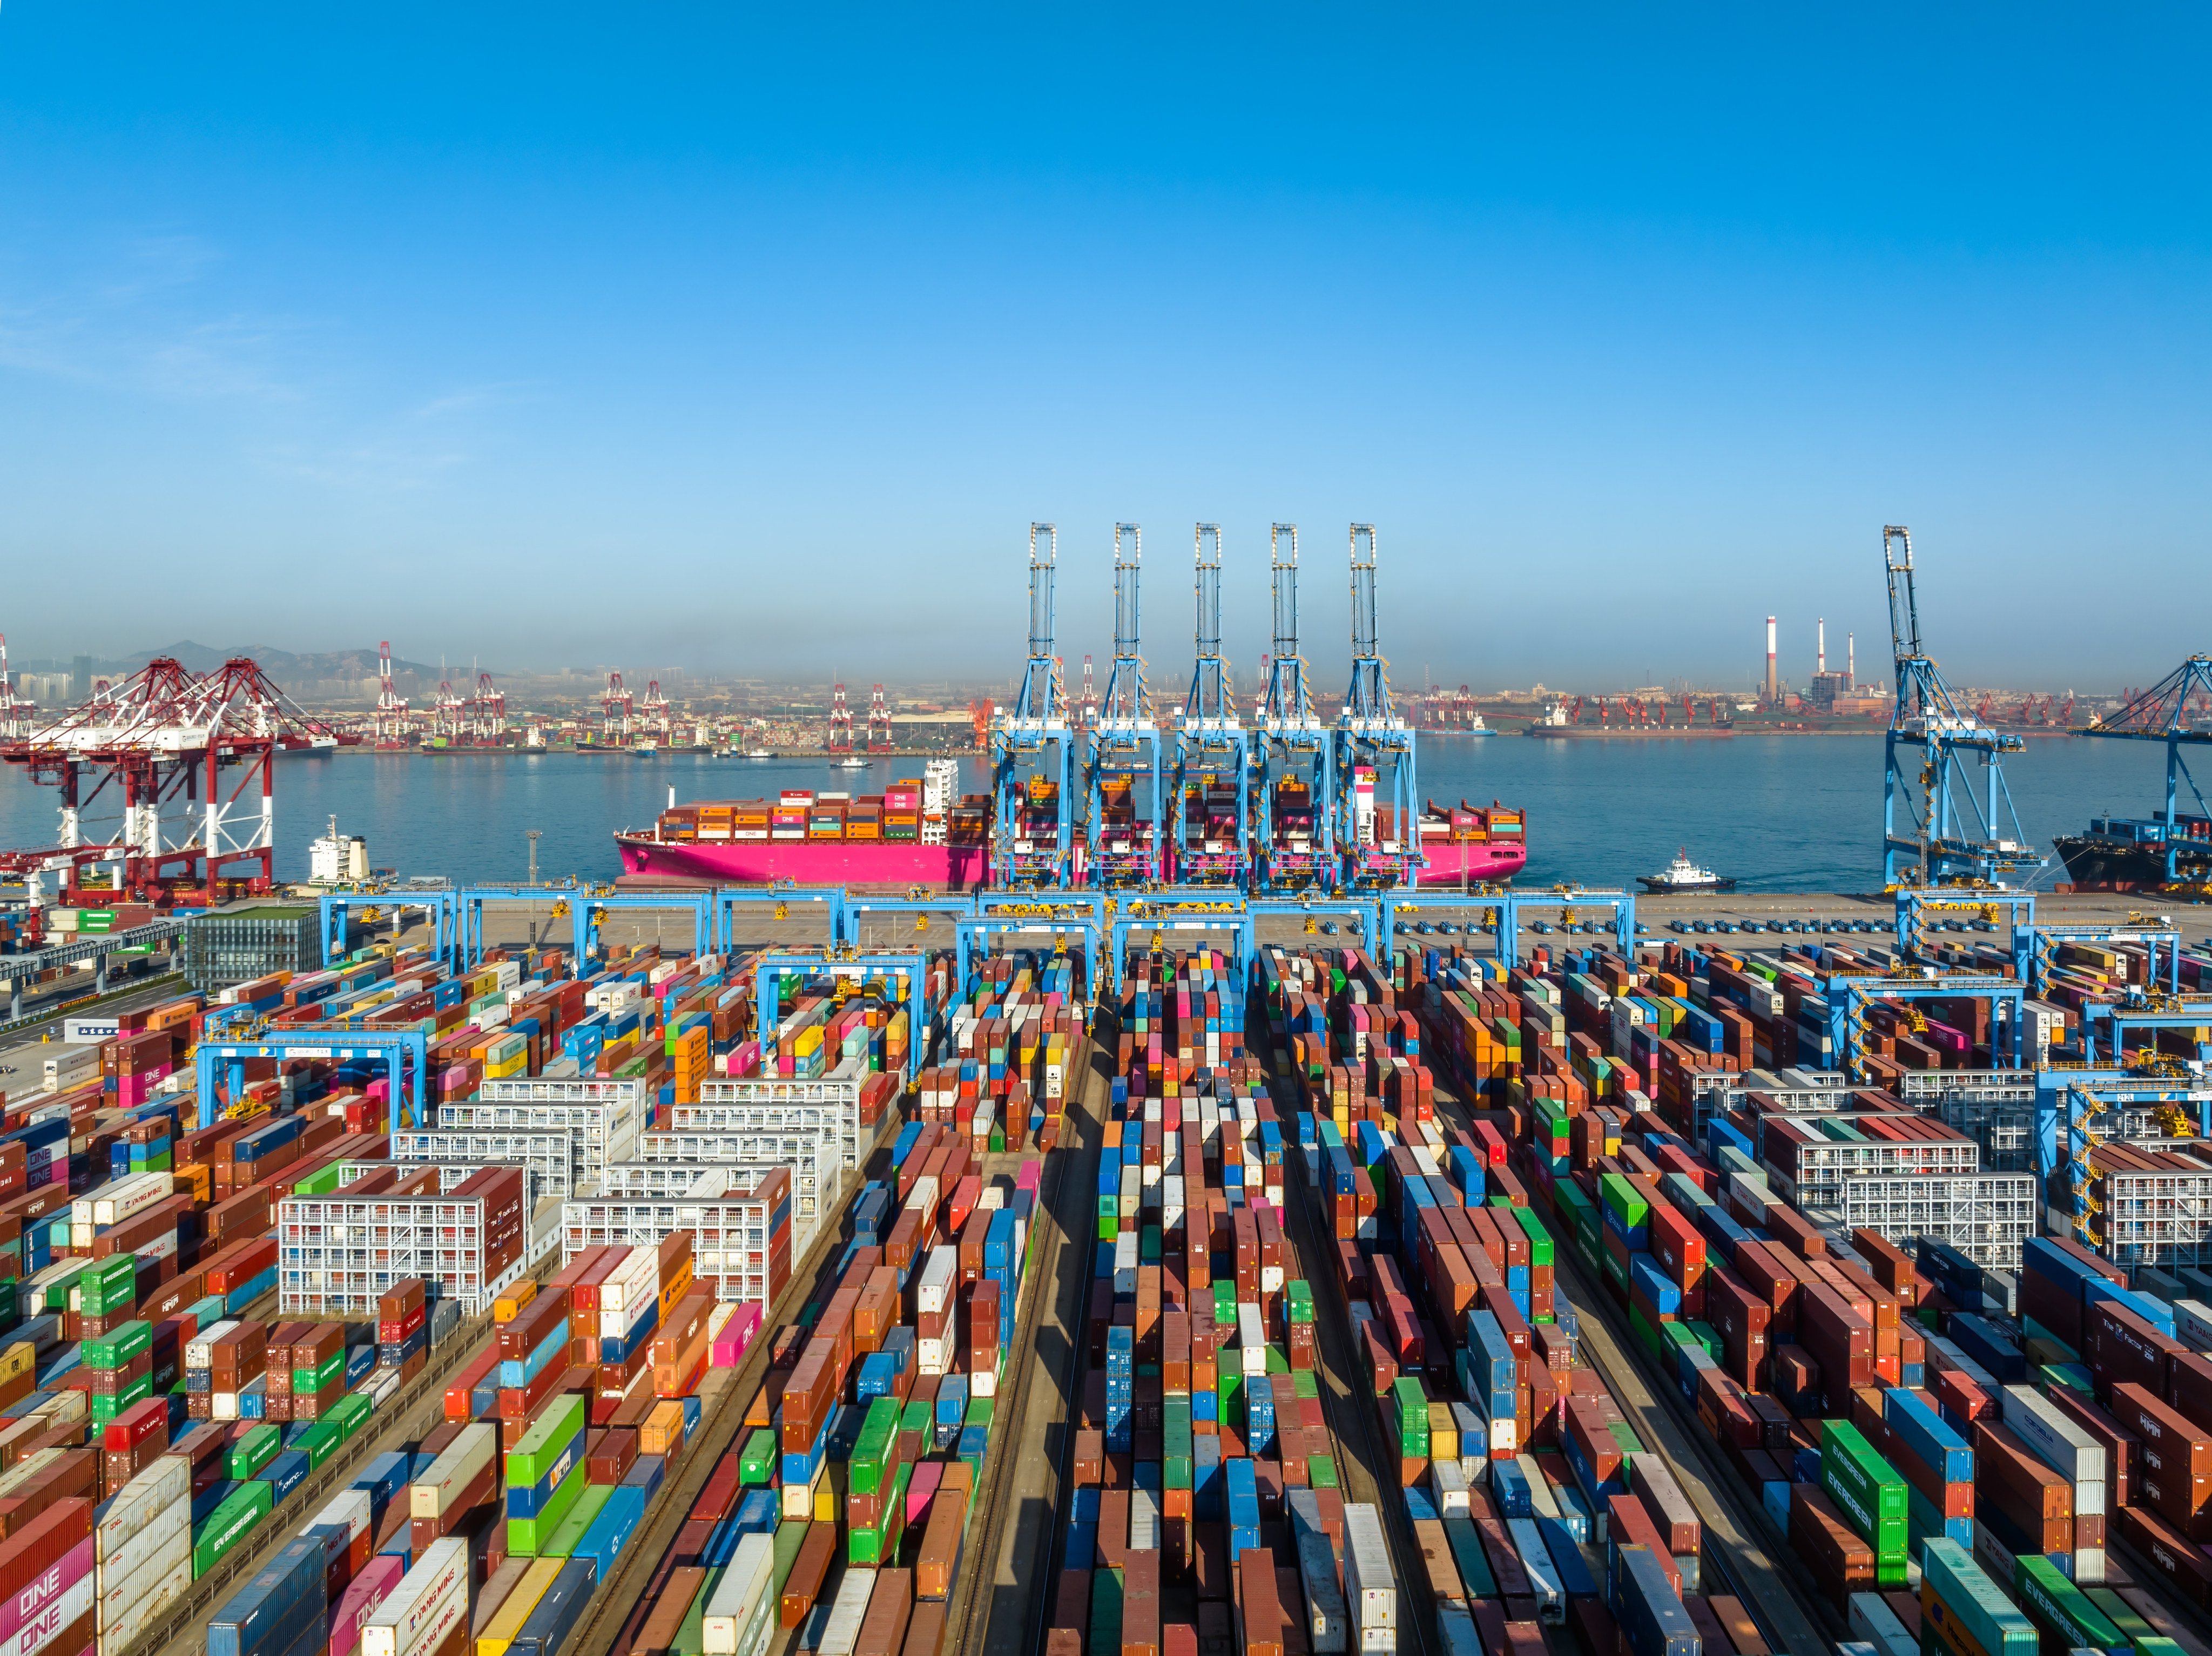 China now has 18 terminals in operation at various ports, with 27 others either under construction or being renovated, according to China’s Ministry of Transport. Photo: Getty Images